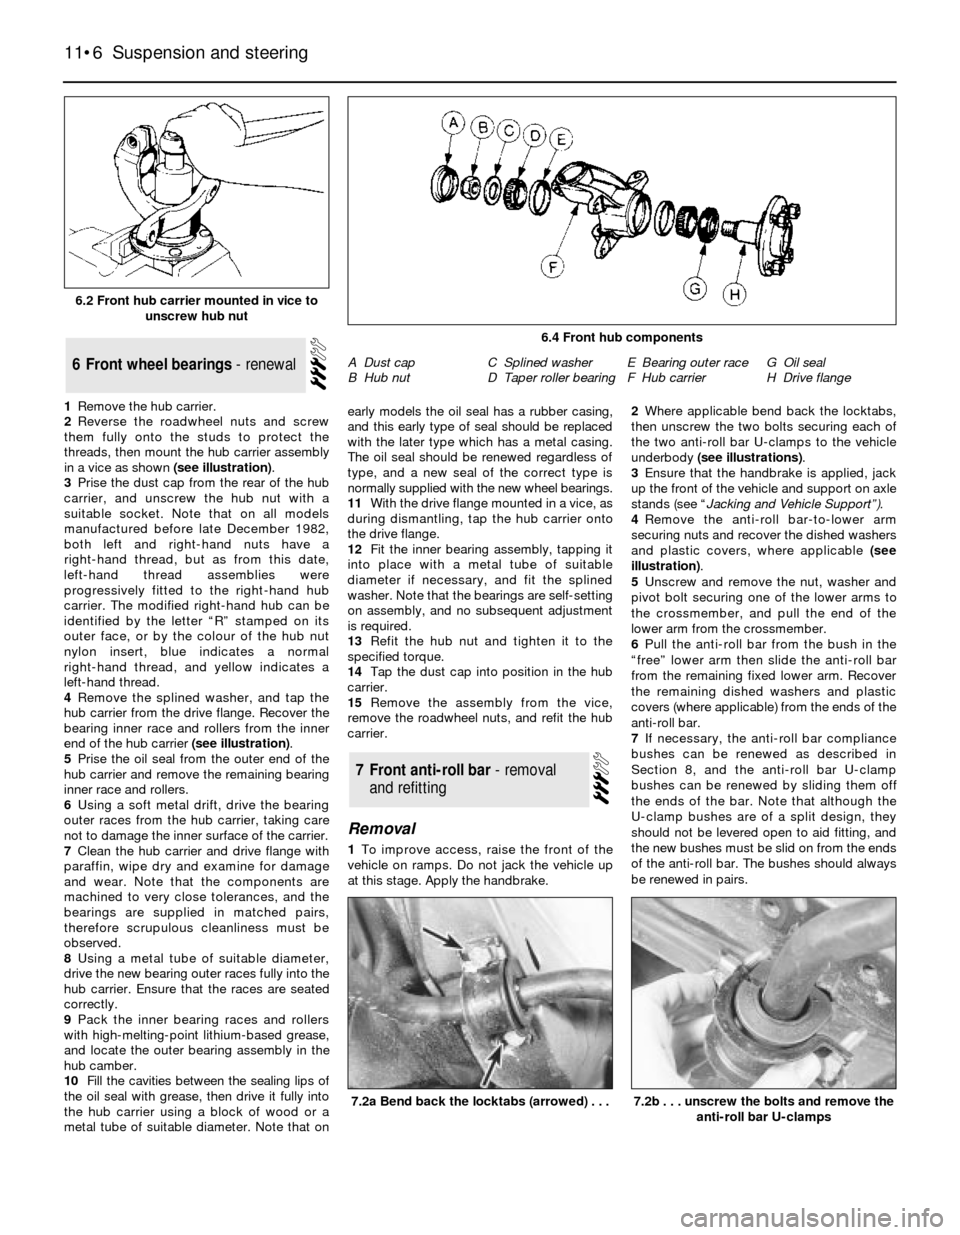 FORD SIERRA 1988 2.G Suspension And Steering Workshop Manual 1Remove the hub carrier.
2Reverse the roadwheel nuts and screw
them fully onto the studs to protect the
threads, then mount the hub carrier assembly
in a vice as shown (see illustration).
3Prise the d